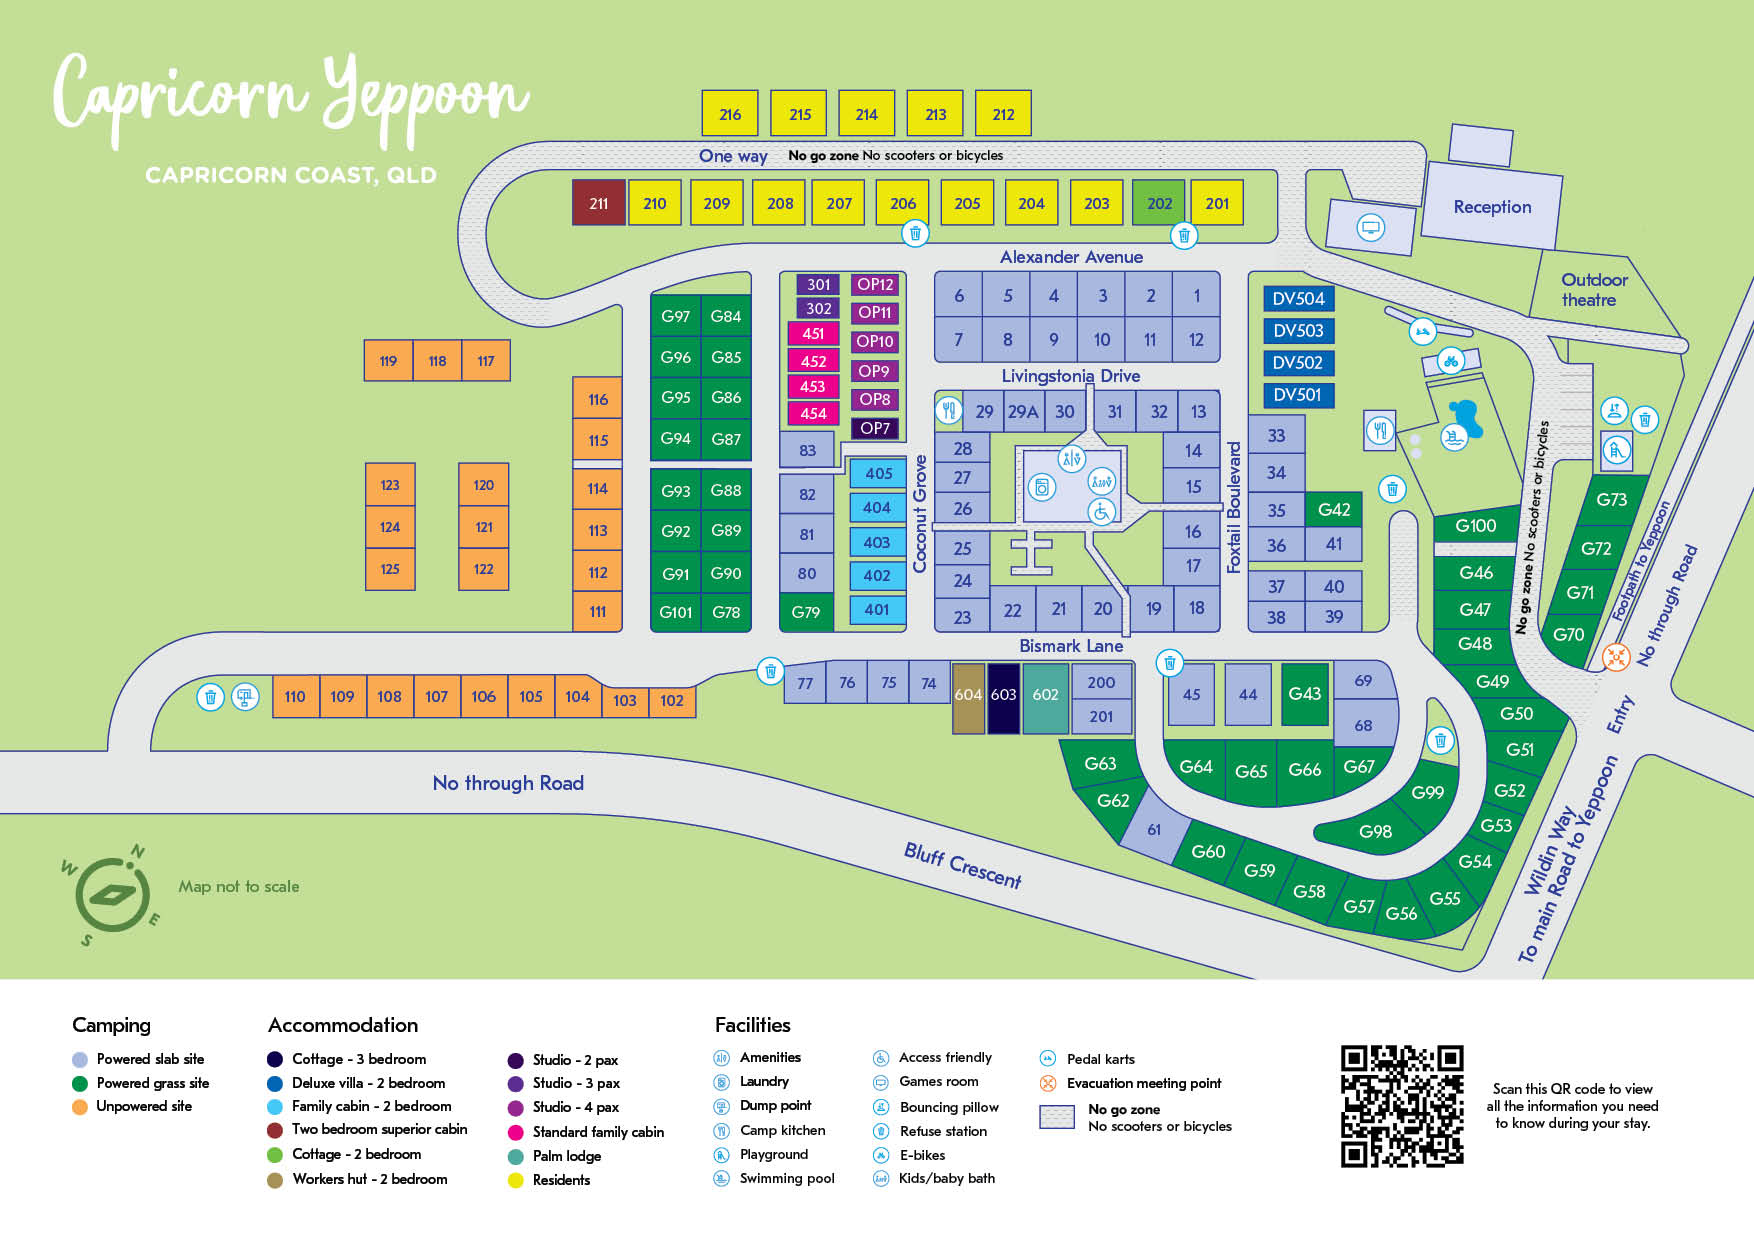 NRMA Capricorn Yeppoon Holiday Park Map and Rules